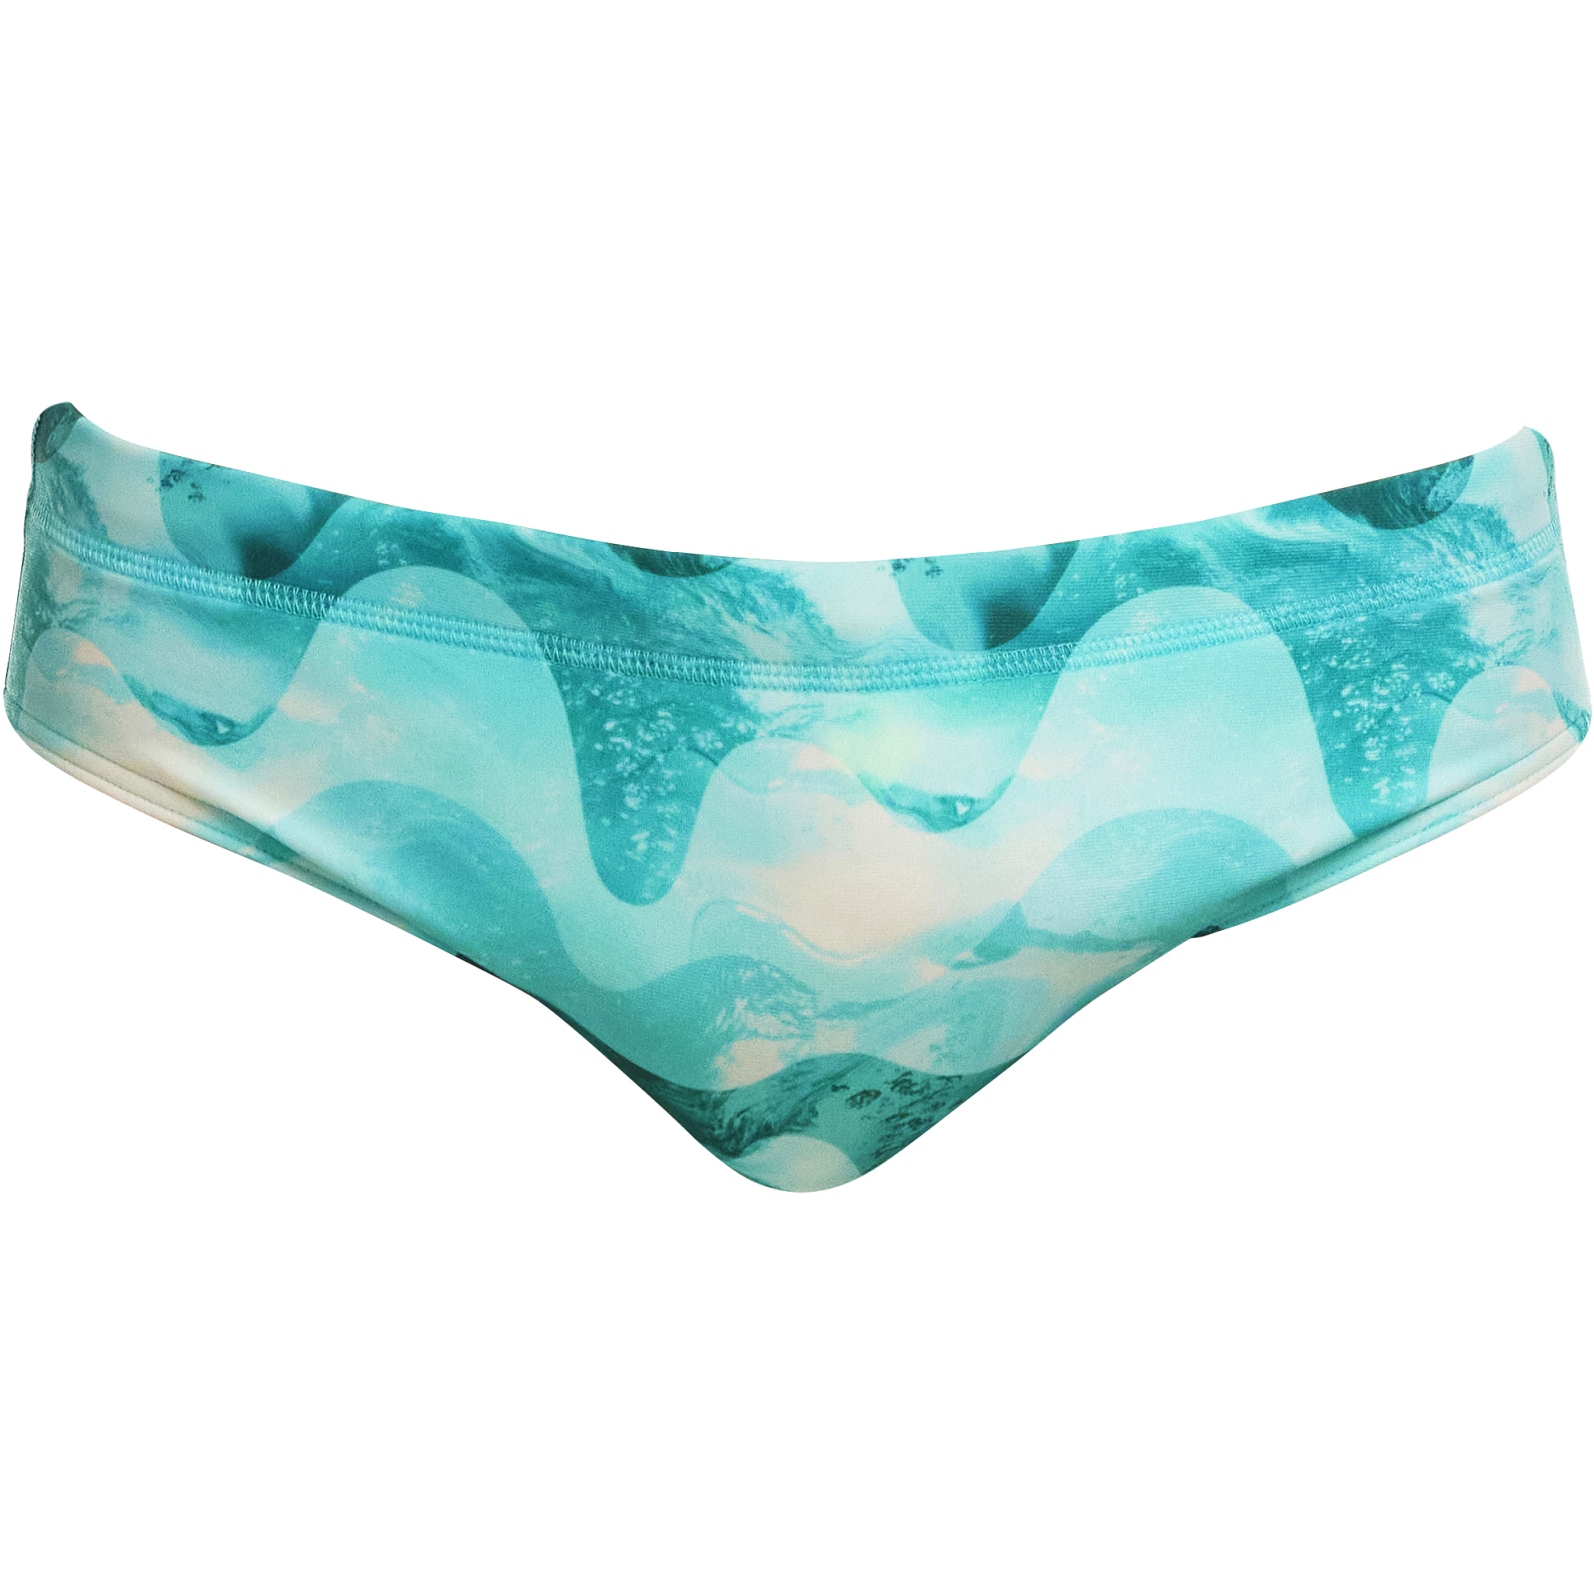 Picture of Funky Trunks Classic Briefs Men - Teal Wave